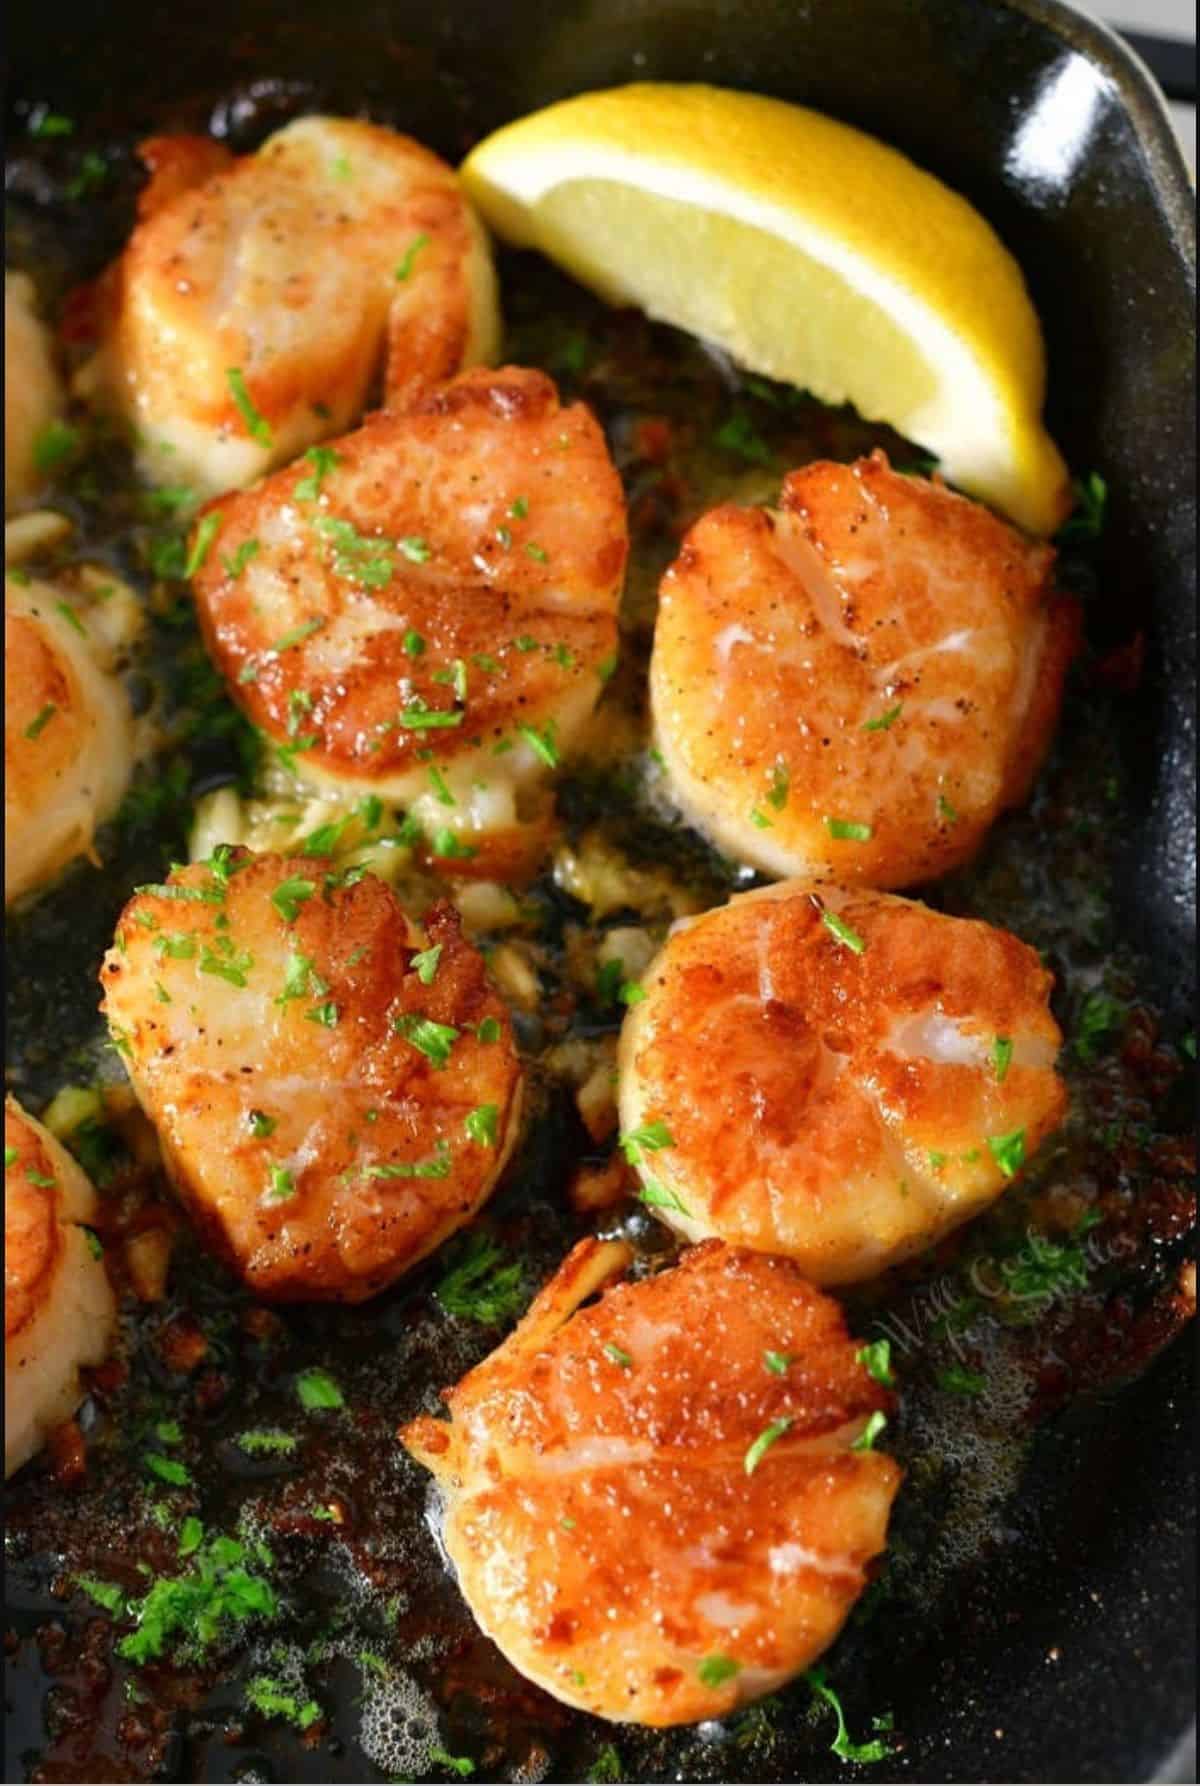 several seared scallops in a skillet with parsley sprinkled on top and a wedge of lemon.